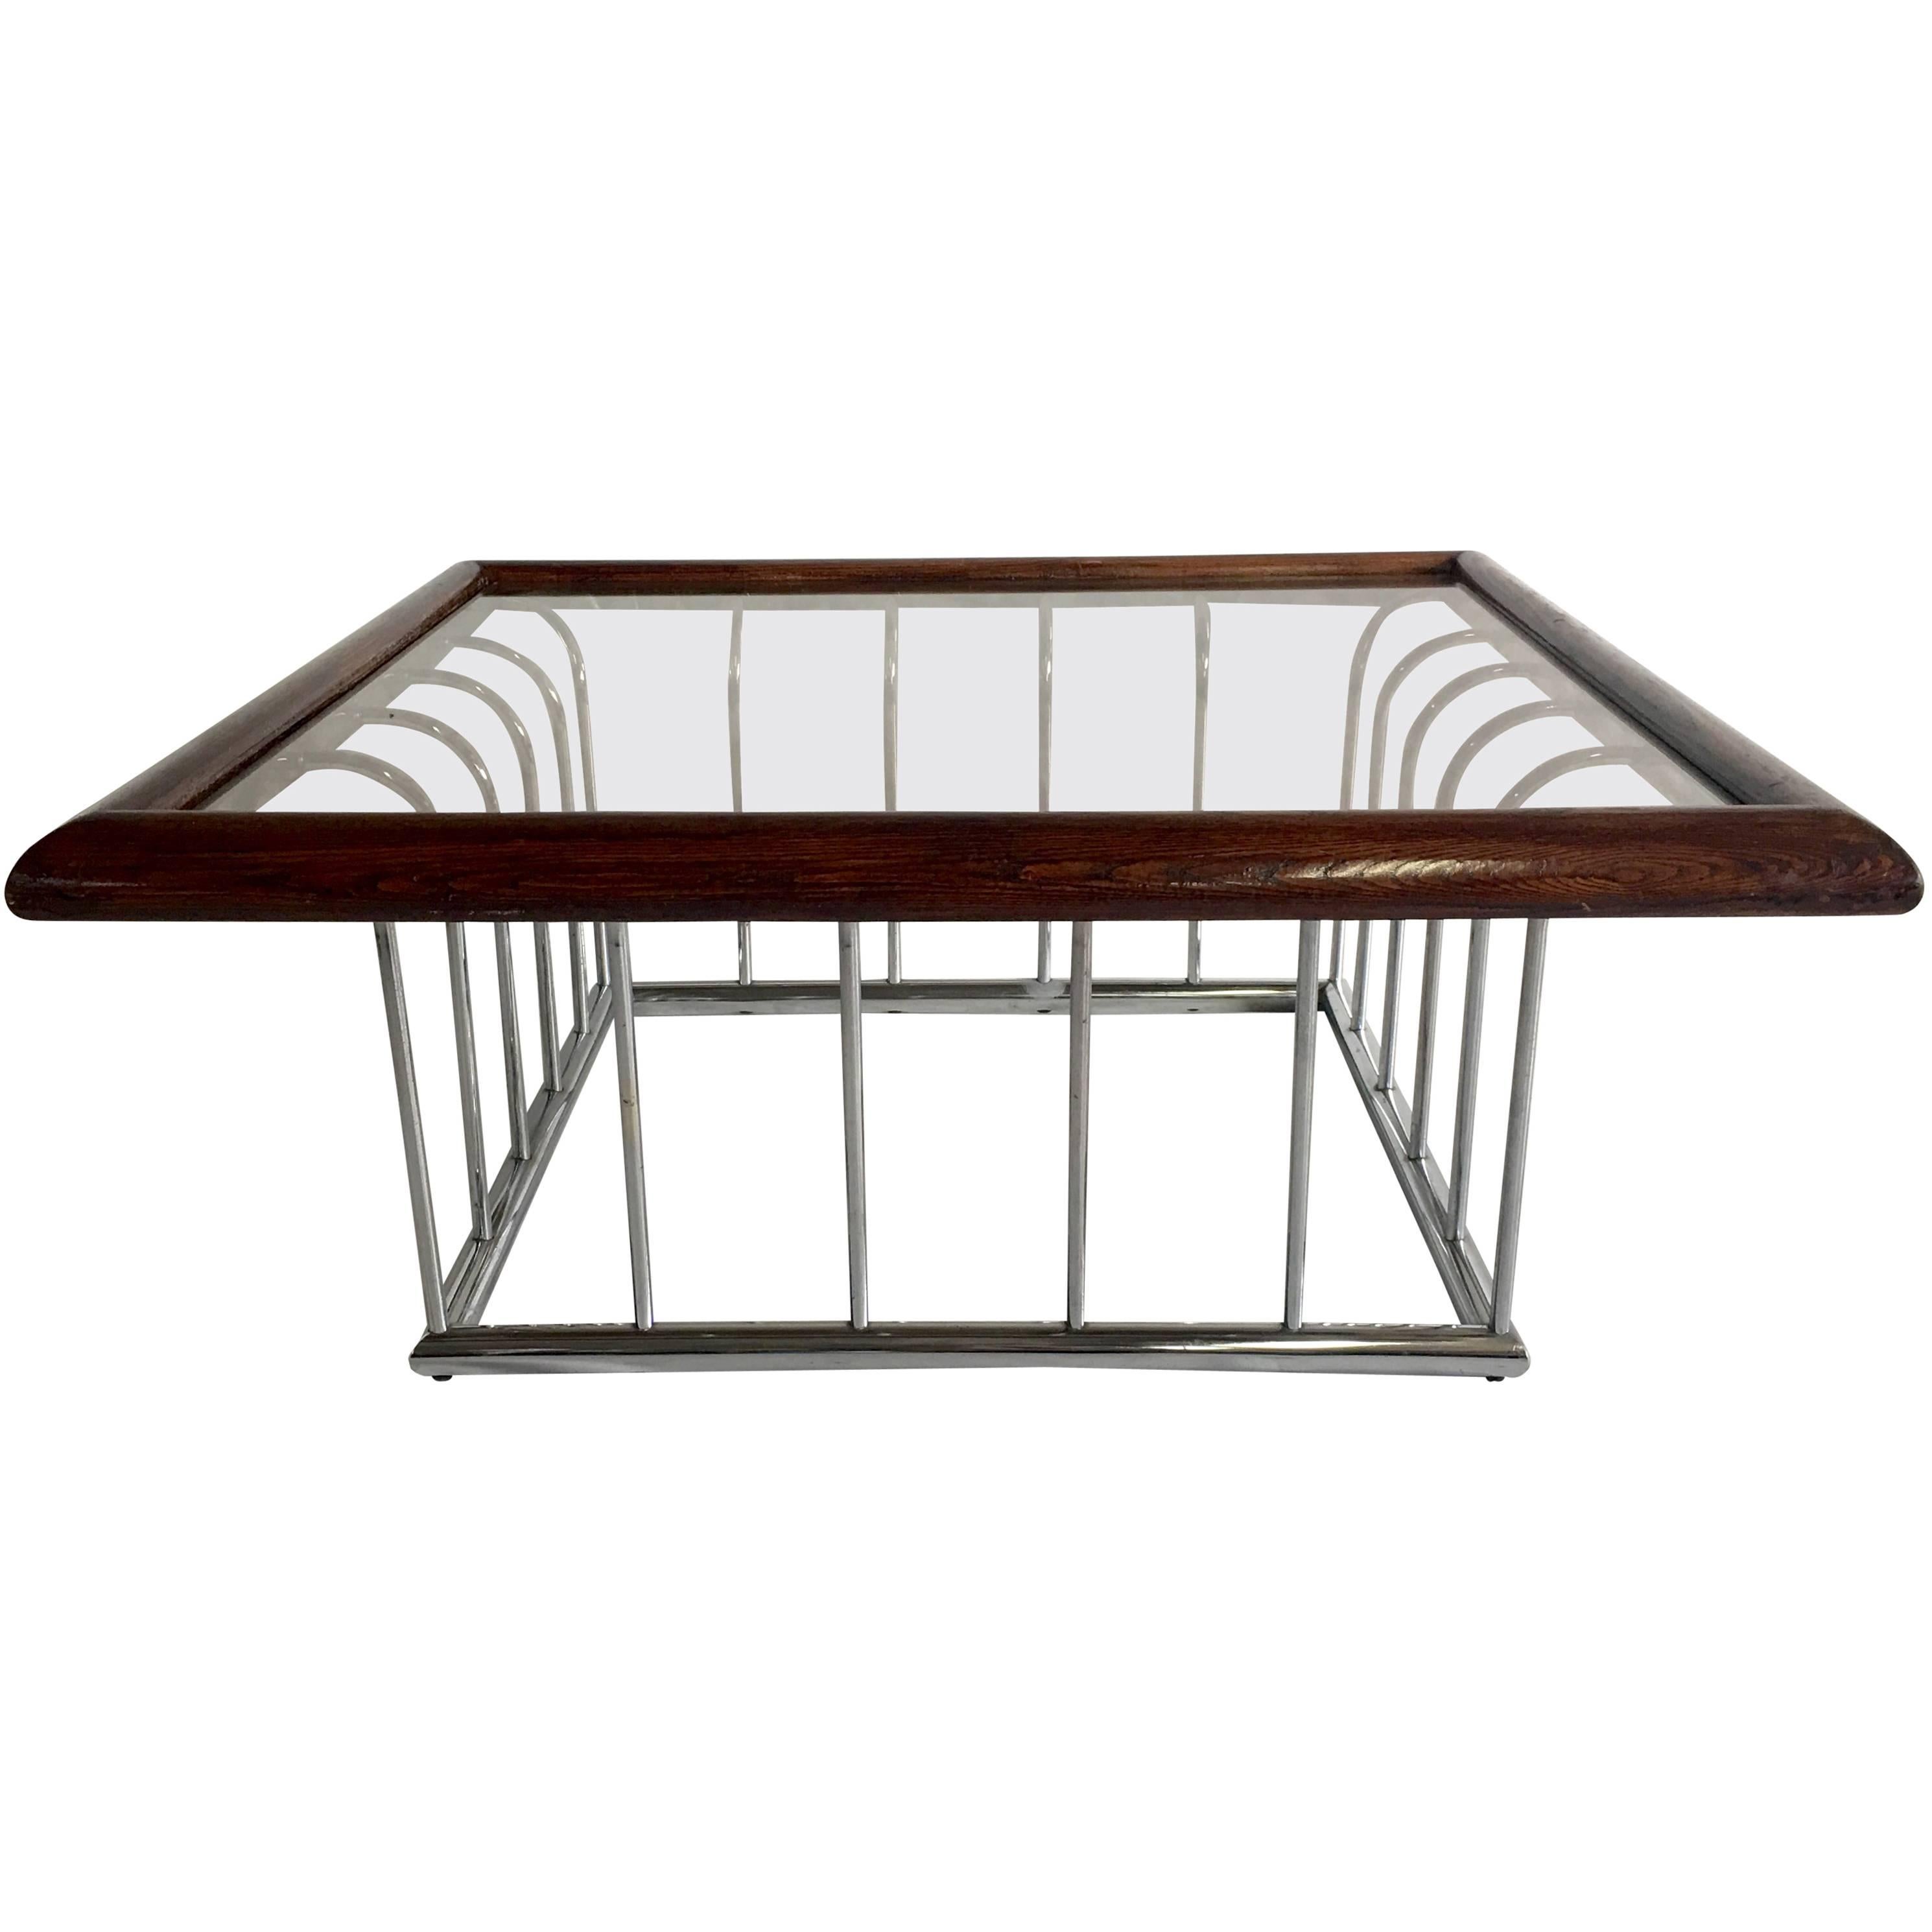 American 20th Century Milo Baughman Style Wood and Chrome Smoked Glass Top Cocktail Table For Sale